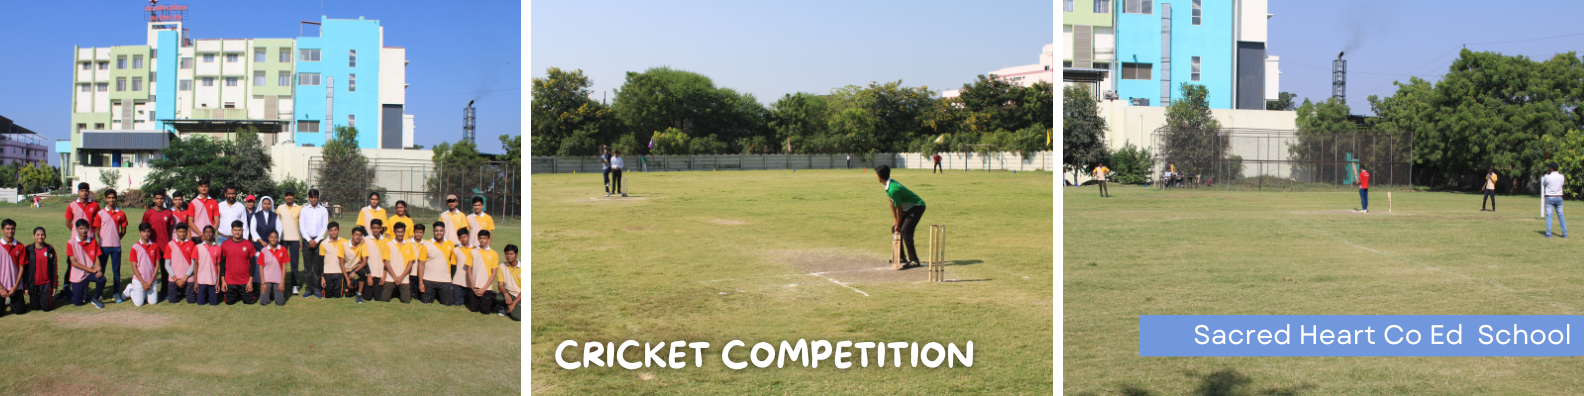 CRICKET_COMPETITION_1.png